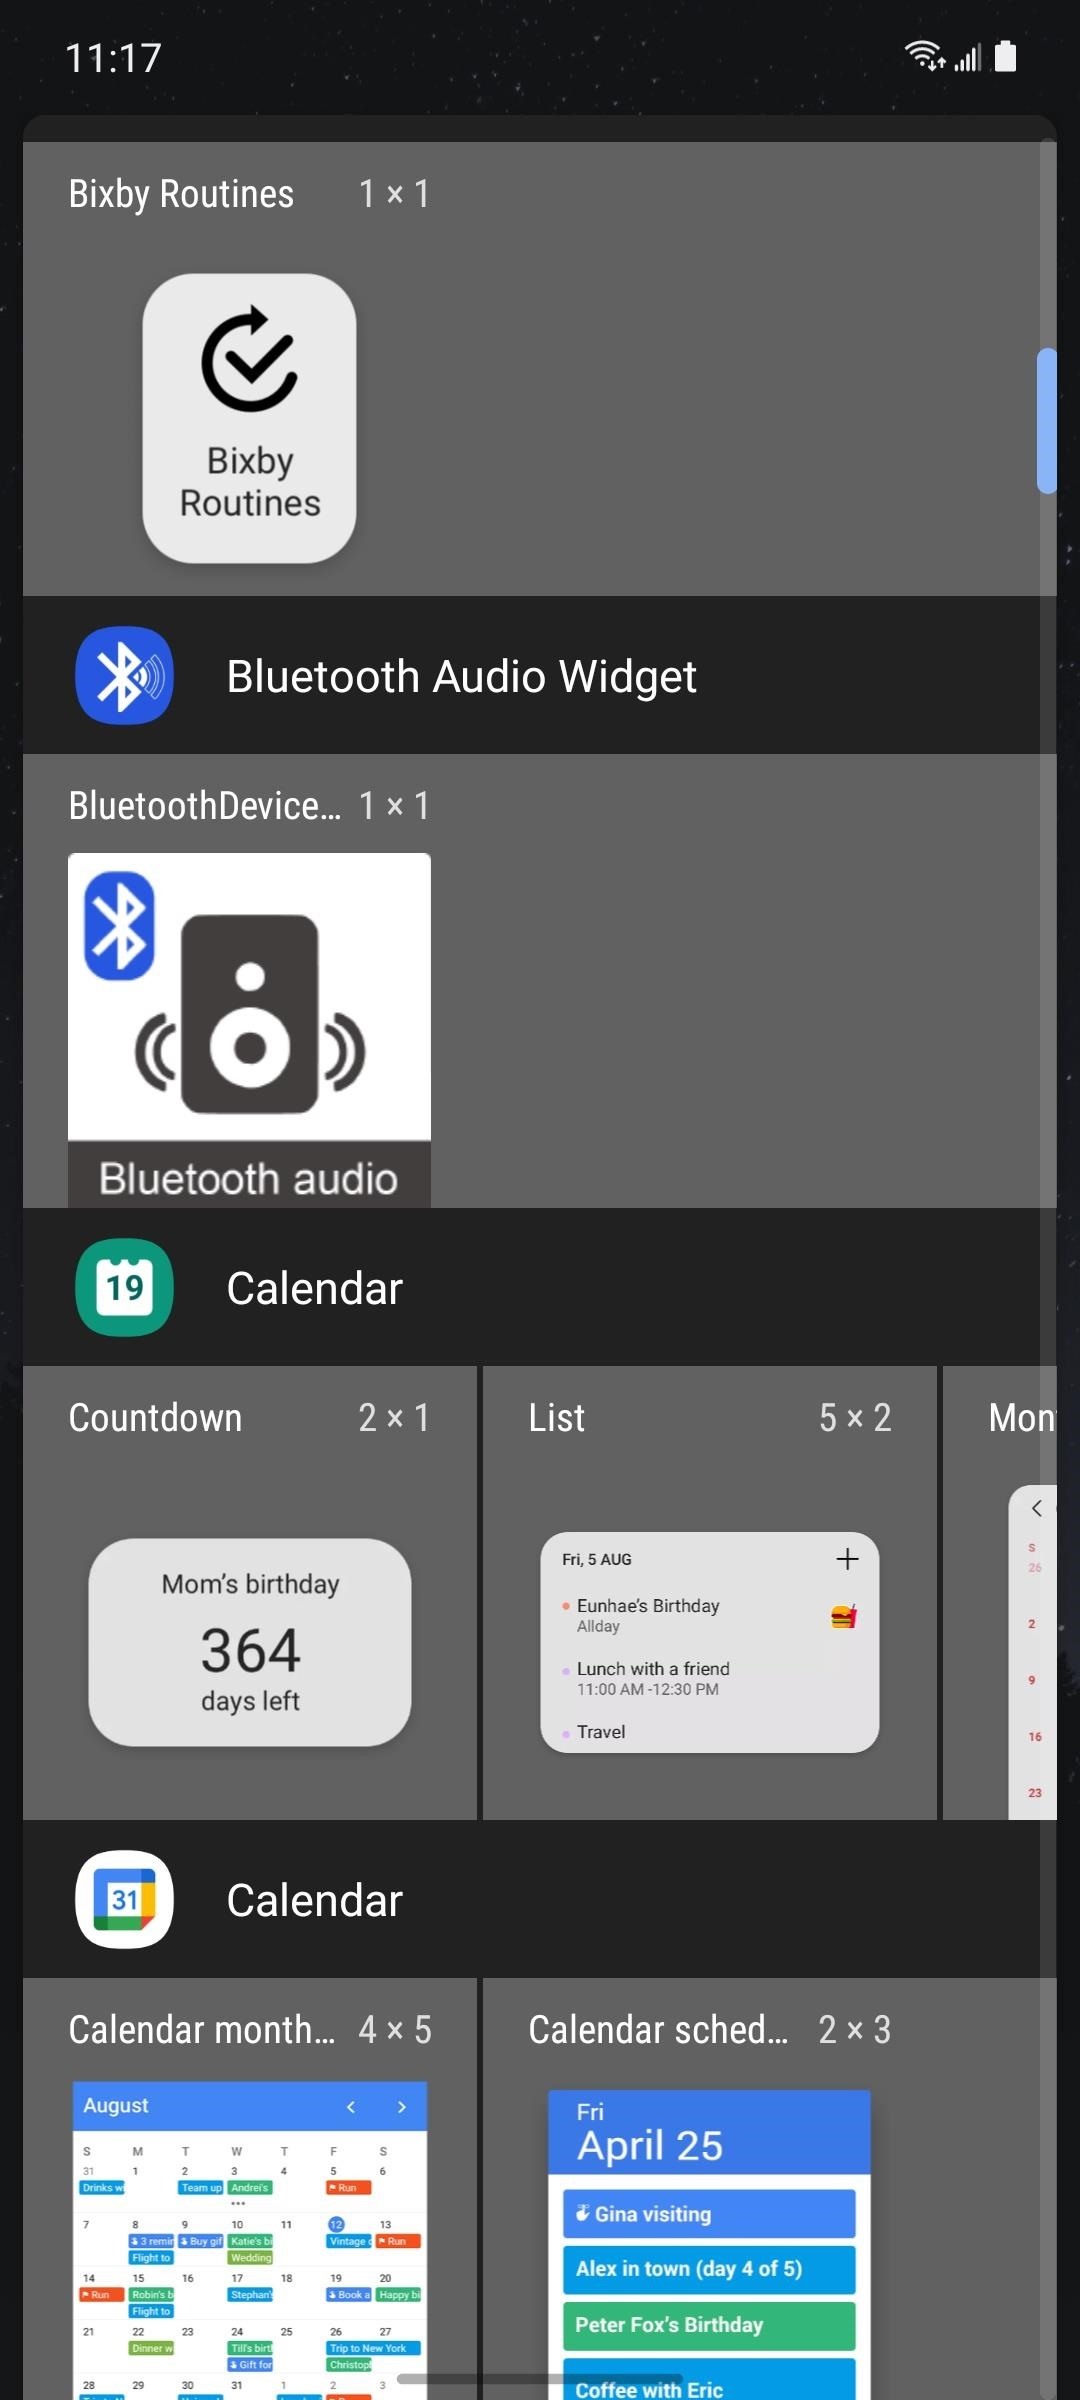 How to Switch Between Bluetooth Accessories in 1 Tap on Android